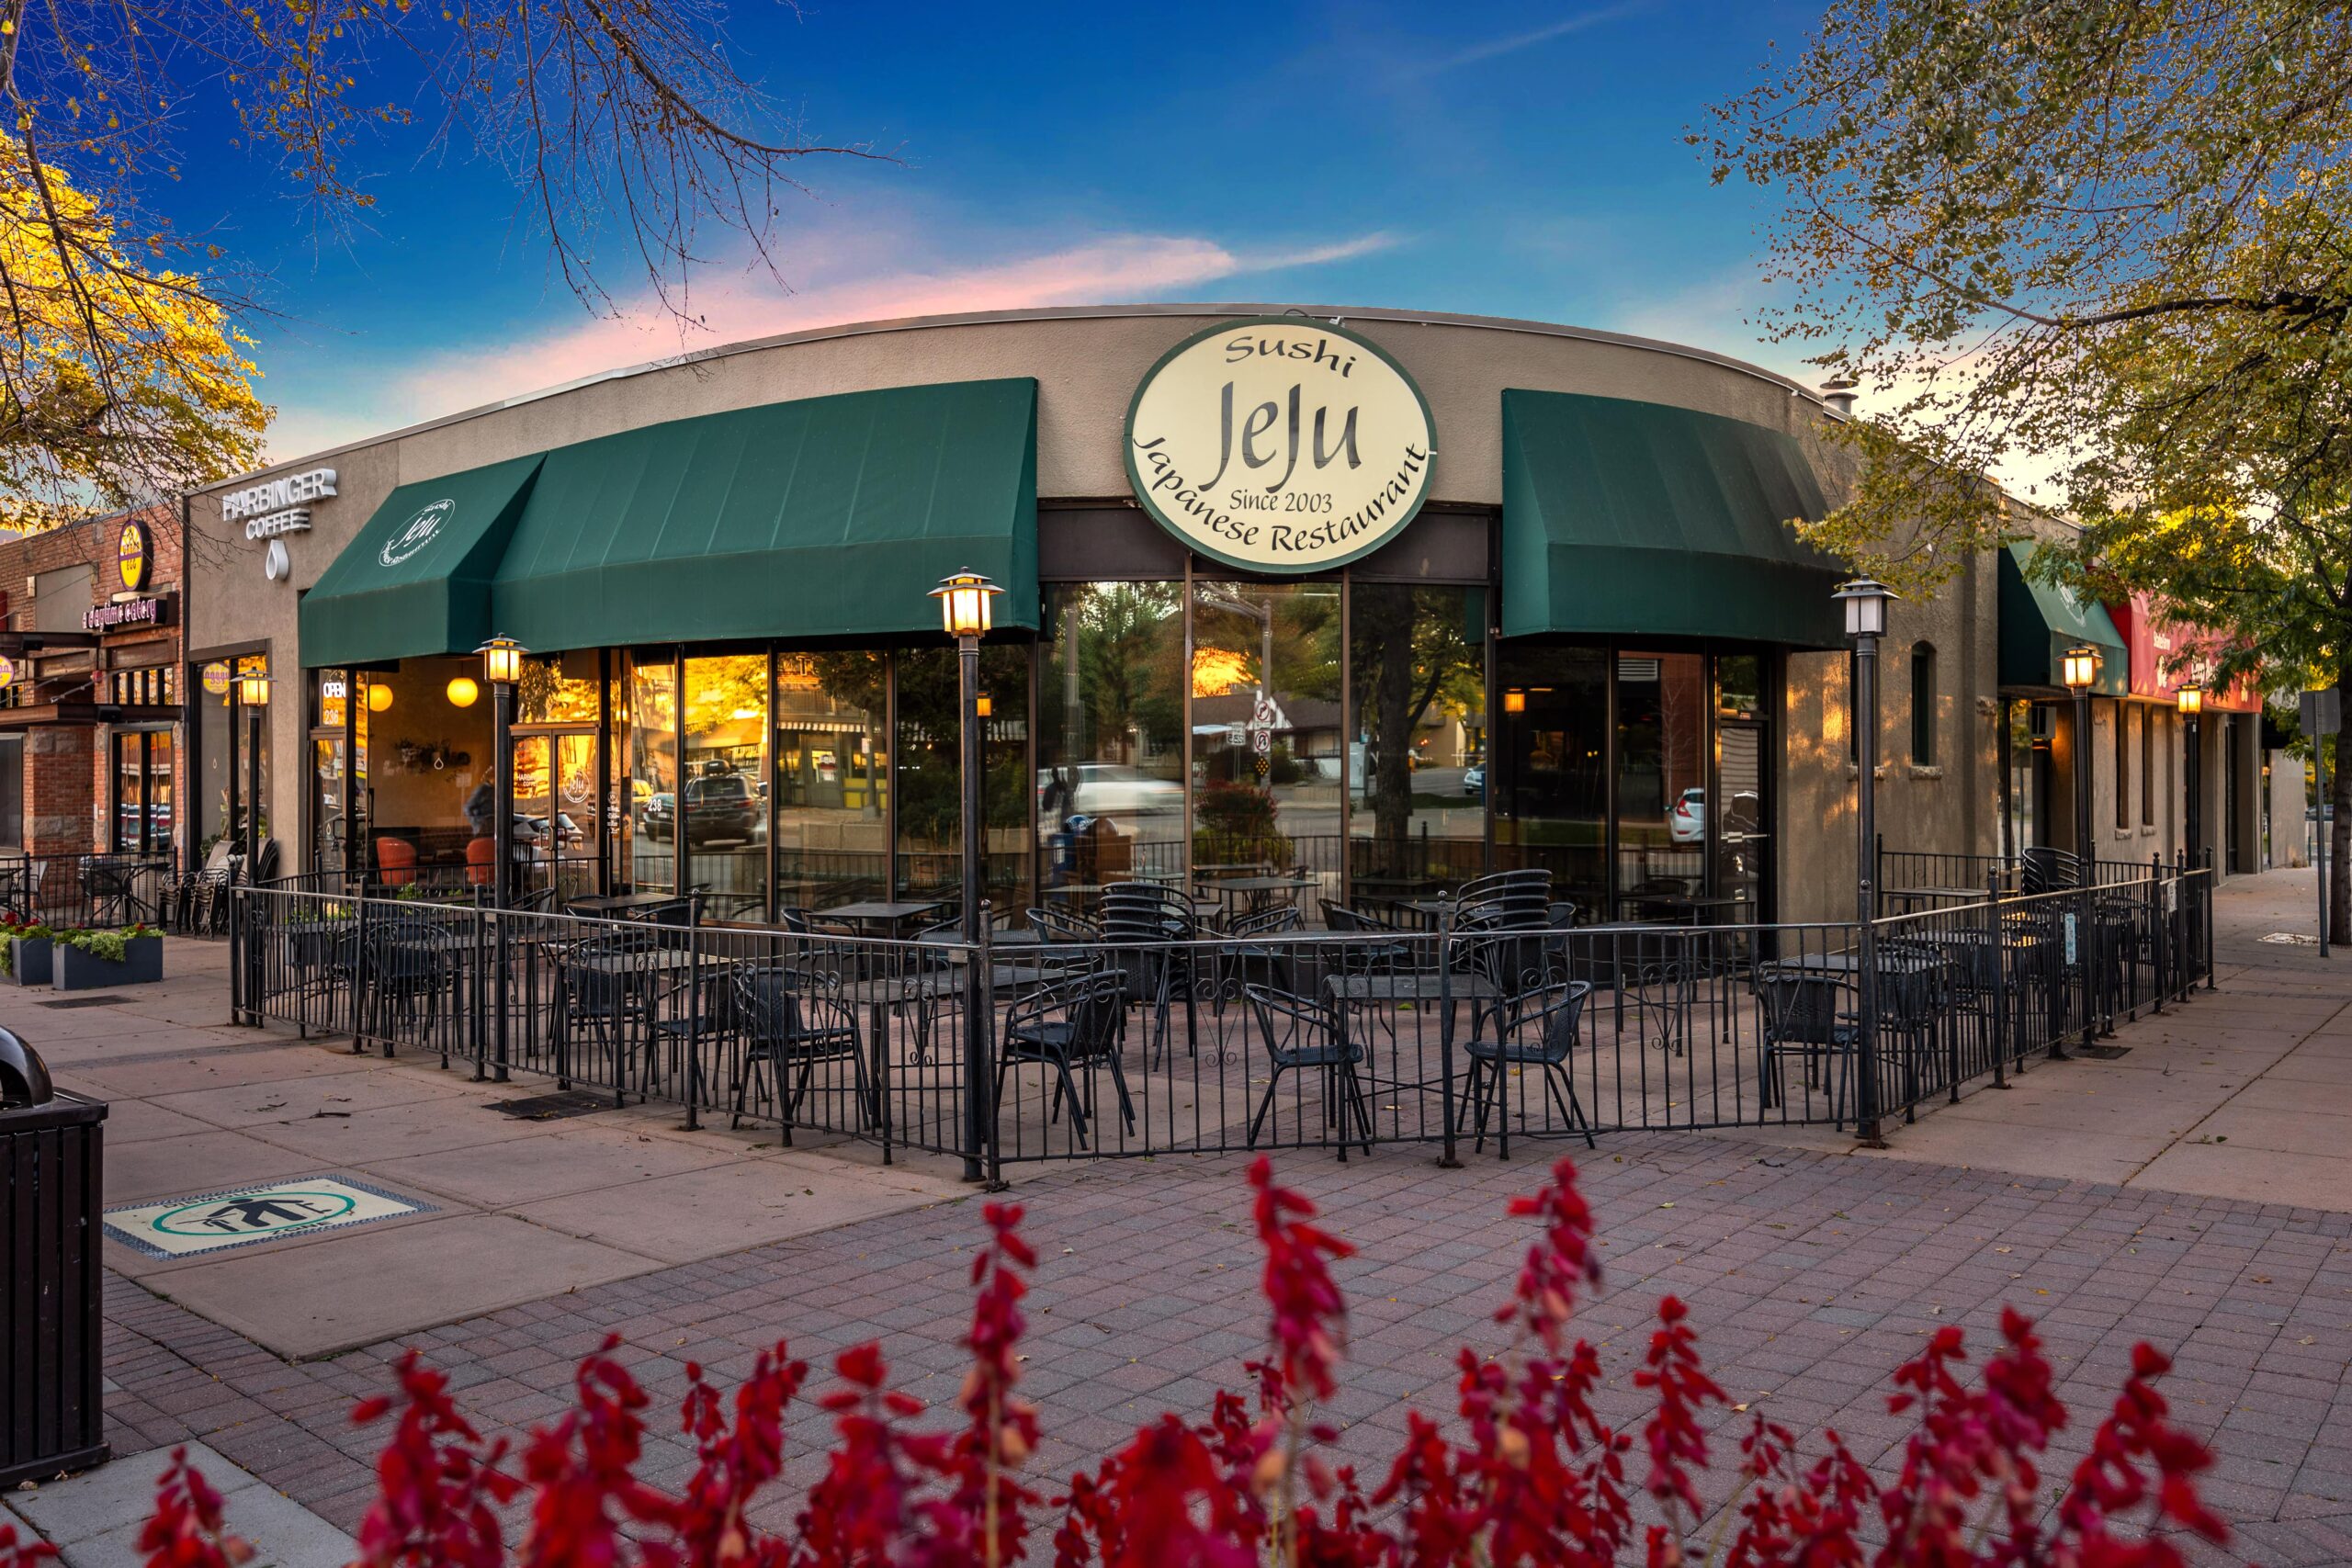 238 S. College Ave. Fort Collins CO GLA 8260sqft Retail.zip238 S. College Ave. Fort Collins CO GLA 8260sqft Retail (3)-min